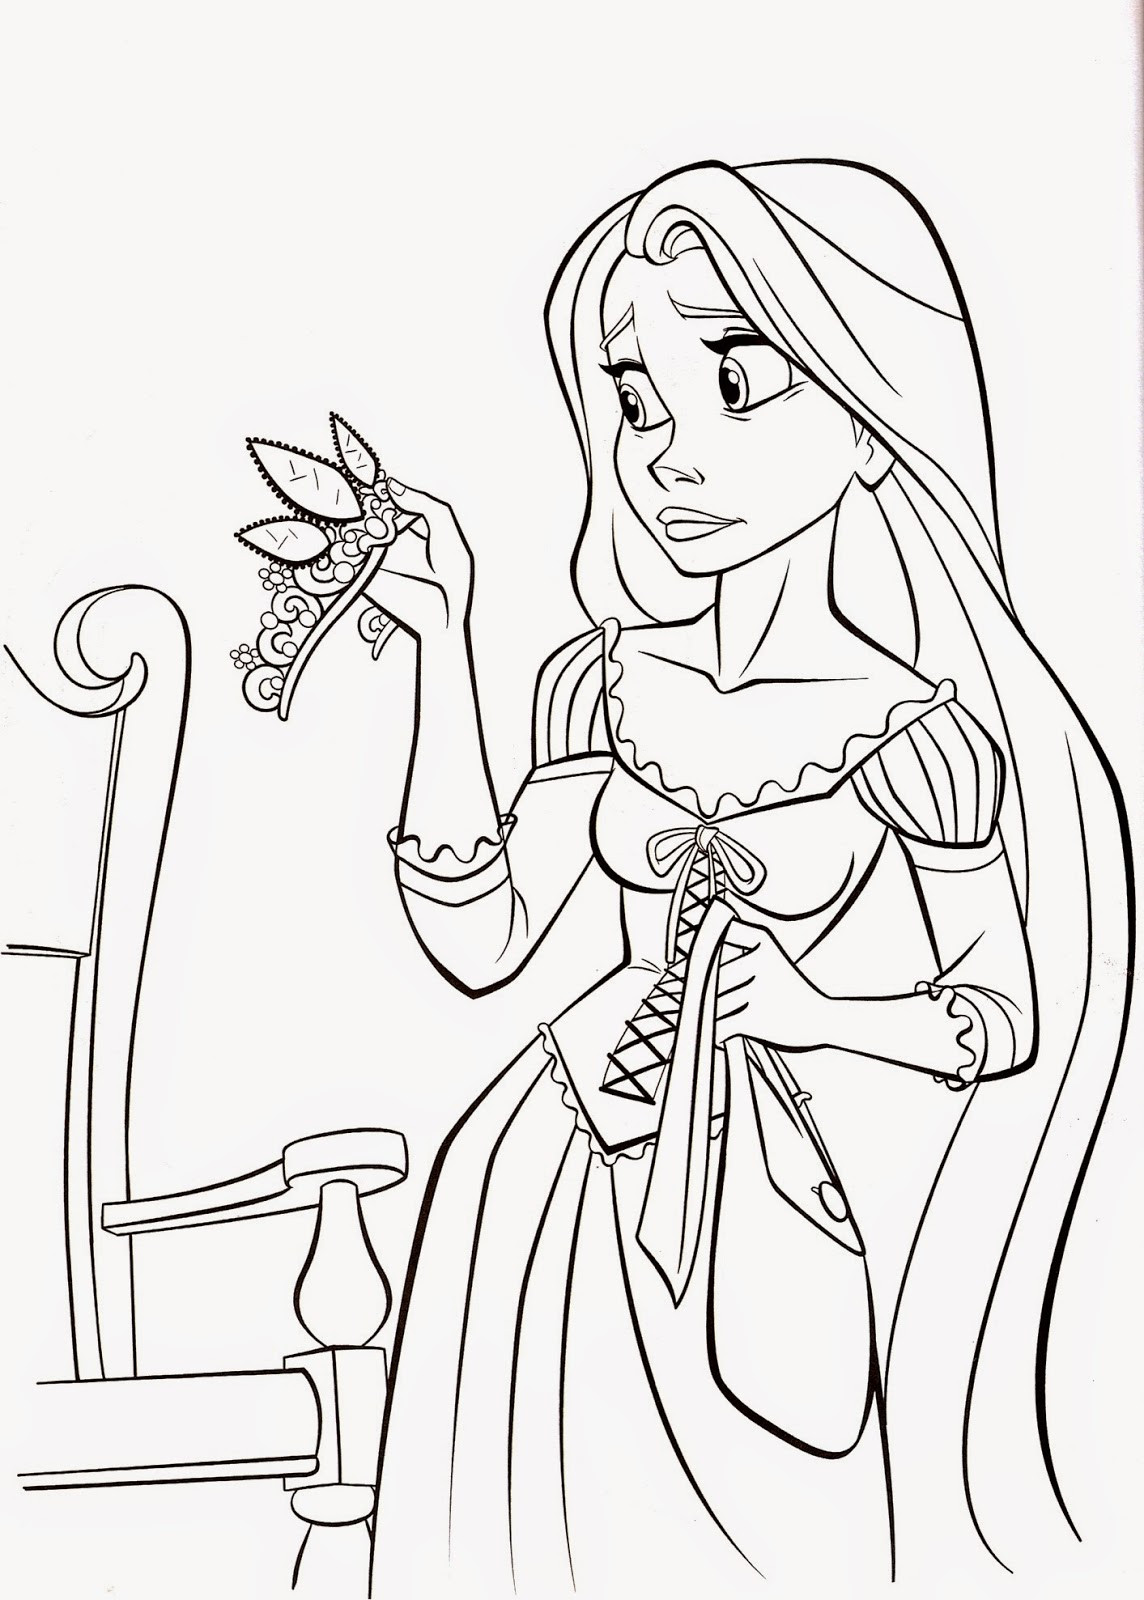 Disney Princess Coloring Pages For Kids
 Beautiful princess holding a crown Free printable coloring